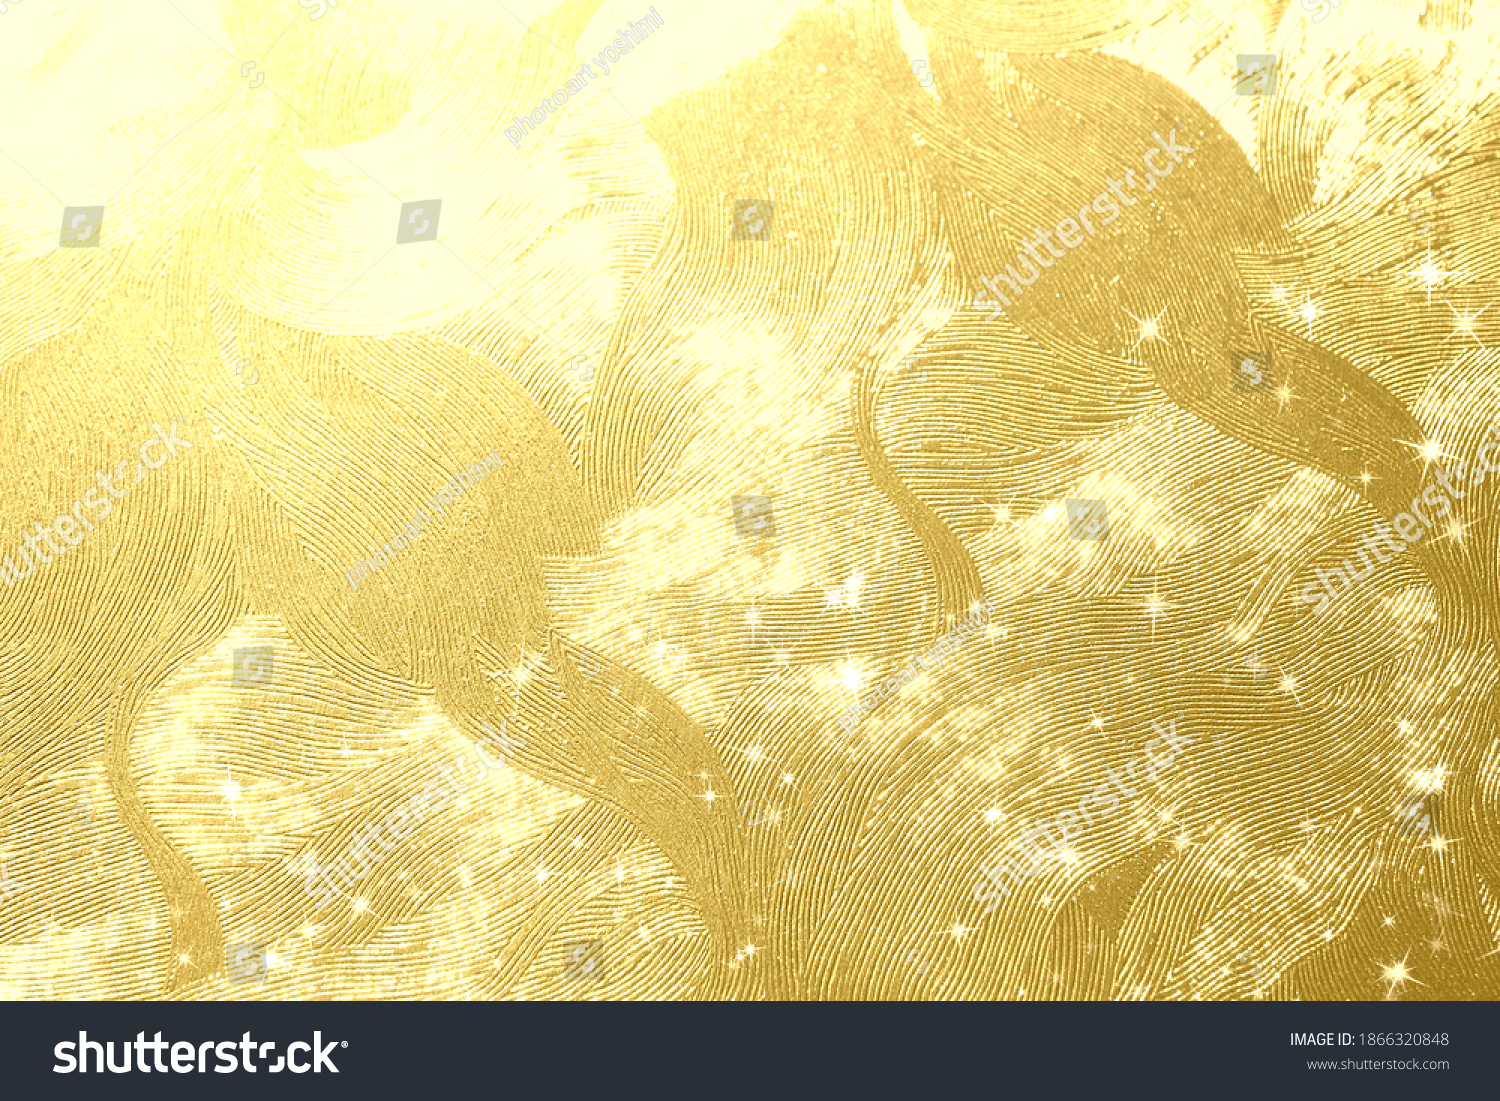 Golden Japanese paper and light background material
 #1866320848